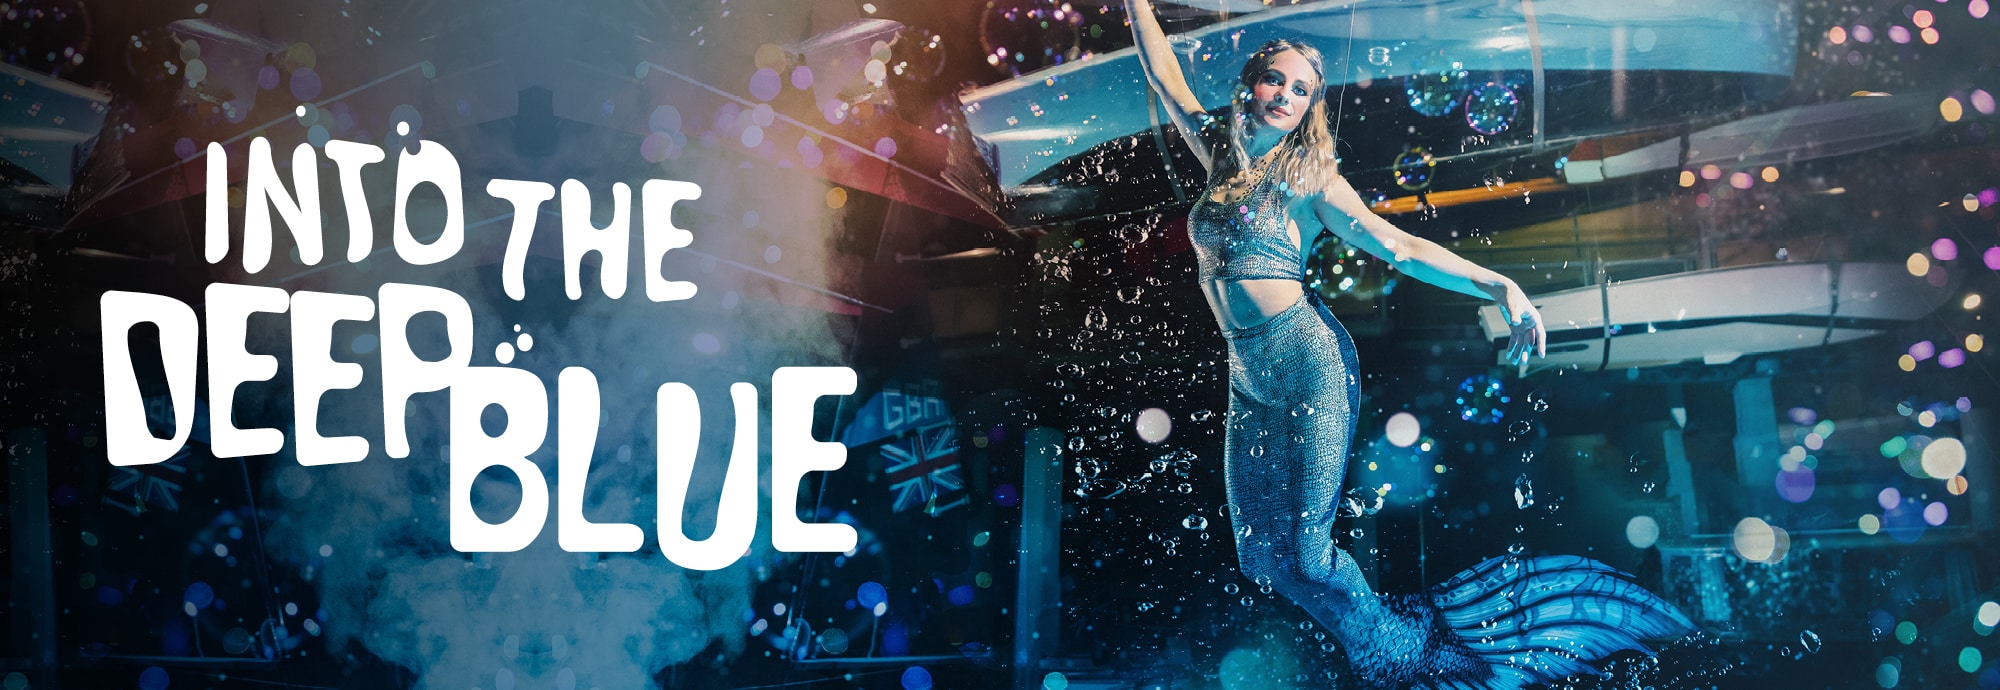 On the left of the image, white text reads 'Into the Deep Blue'. On the right, a lady in a mermaid costume is suspended in mid-air.